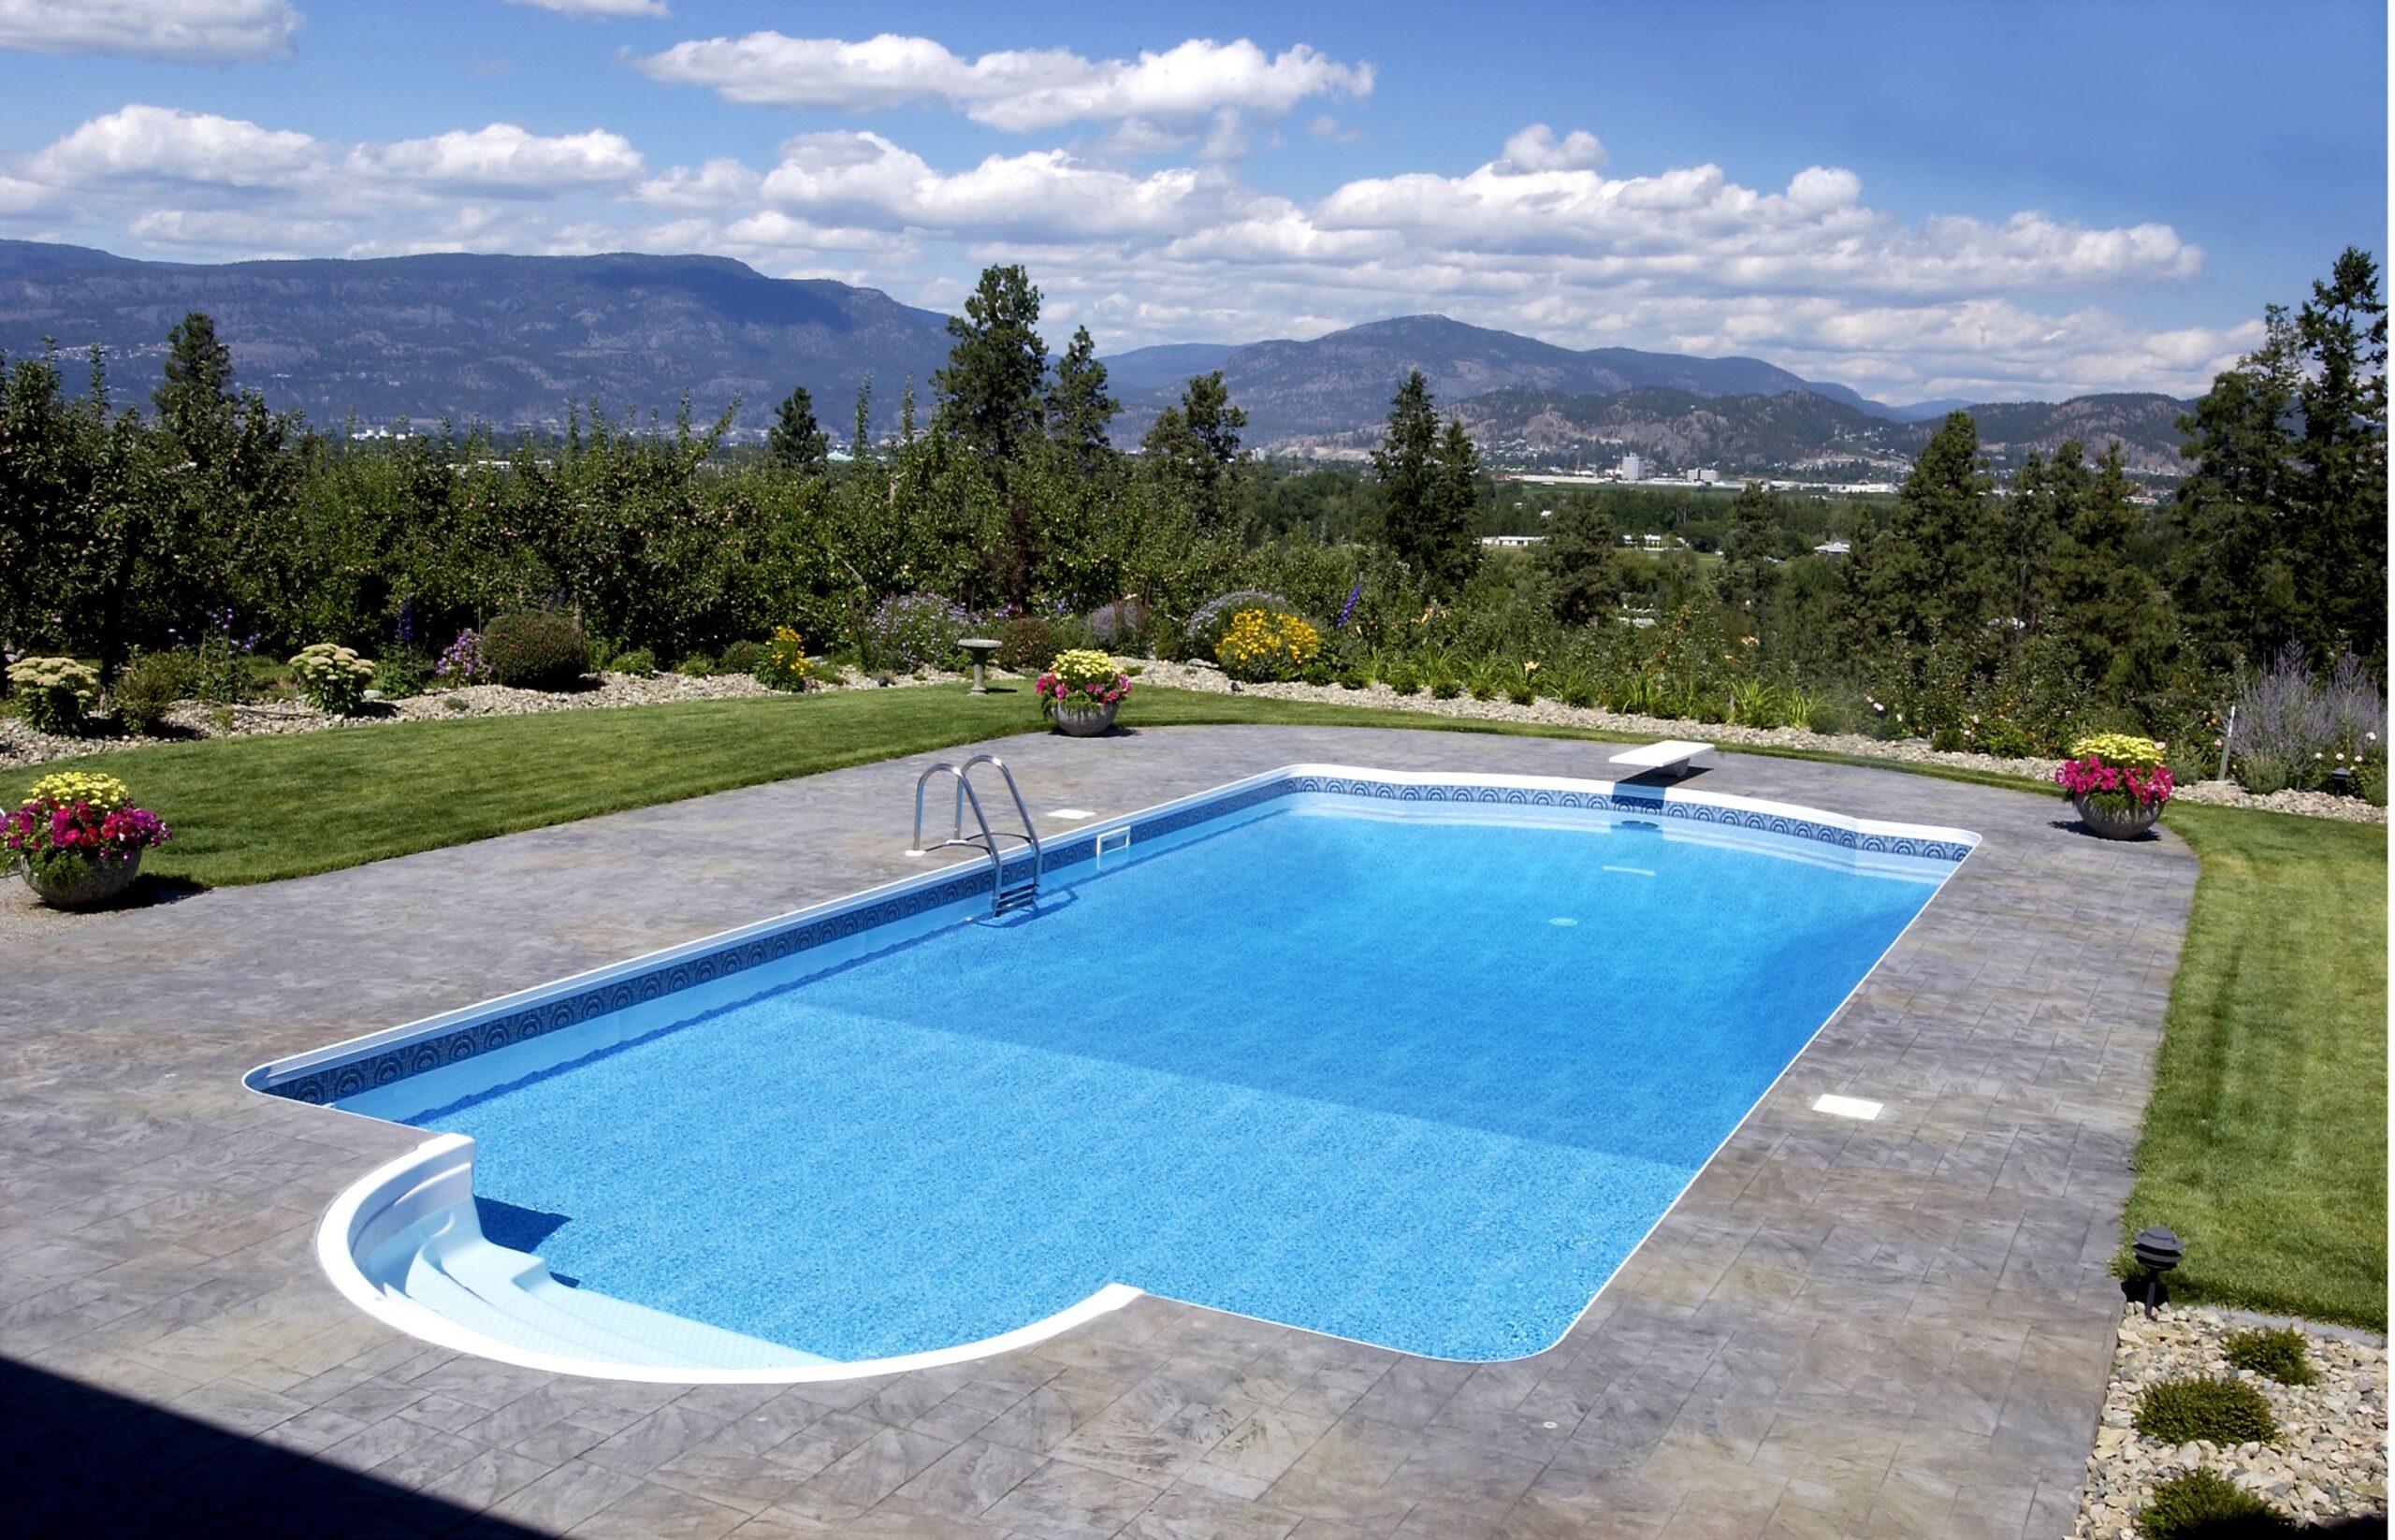 Is It Costly to Build a Swimming Pool?